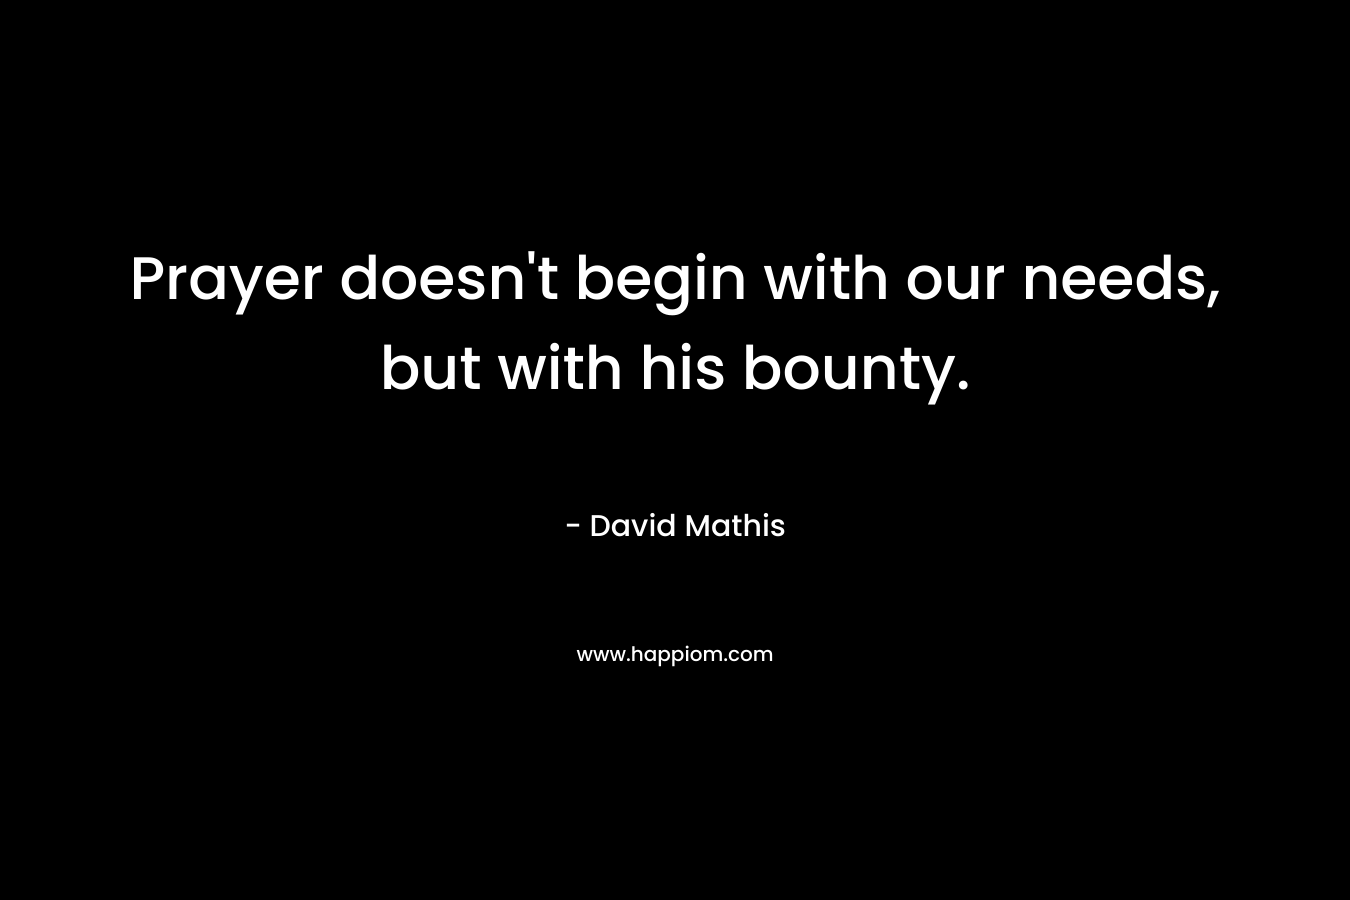 Prayer doesn’t begin with our needs, but with his bounty. – David Mathis